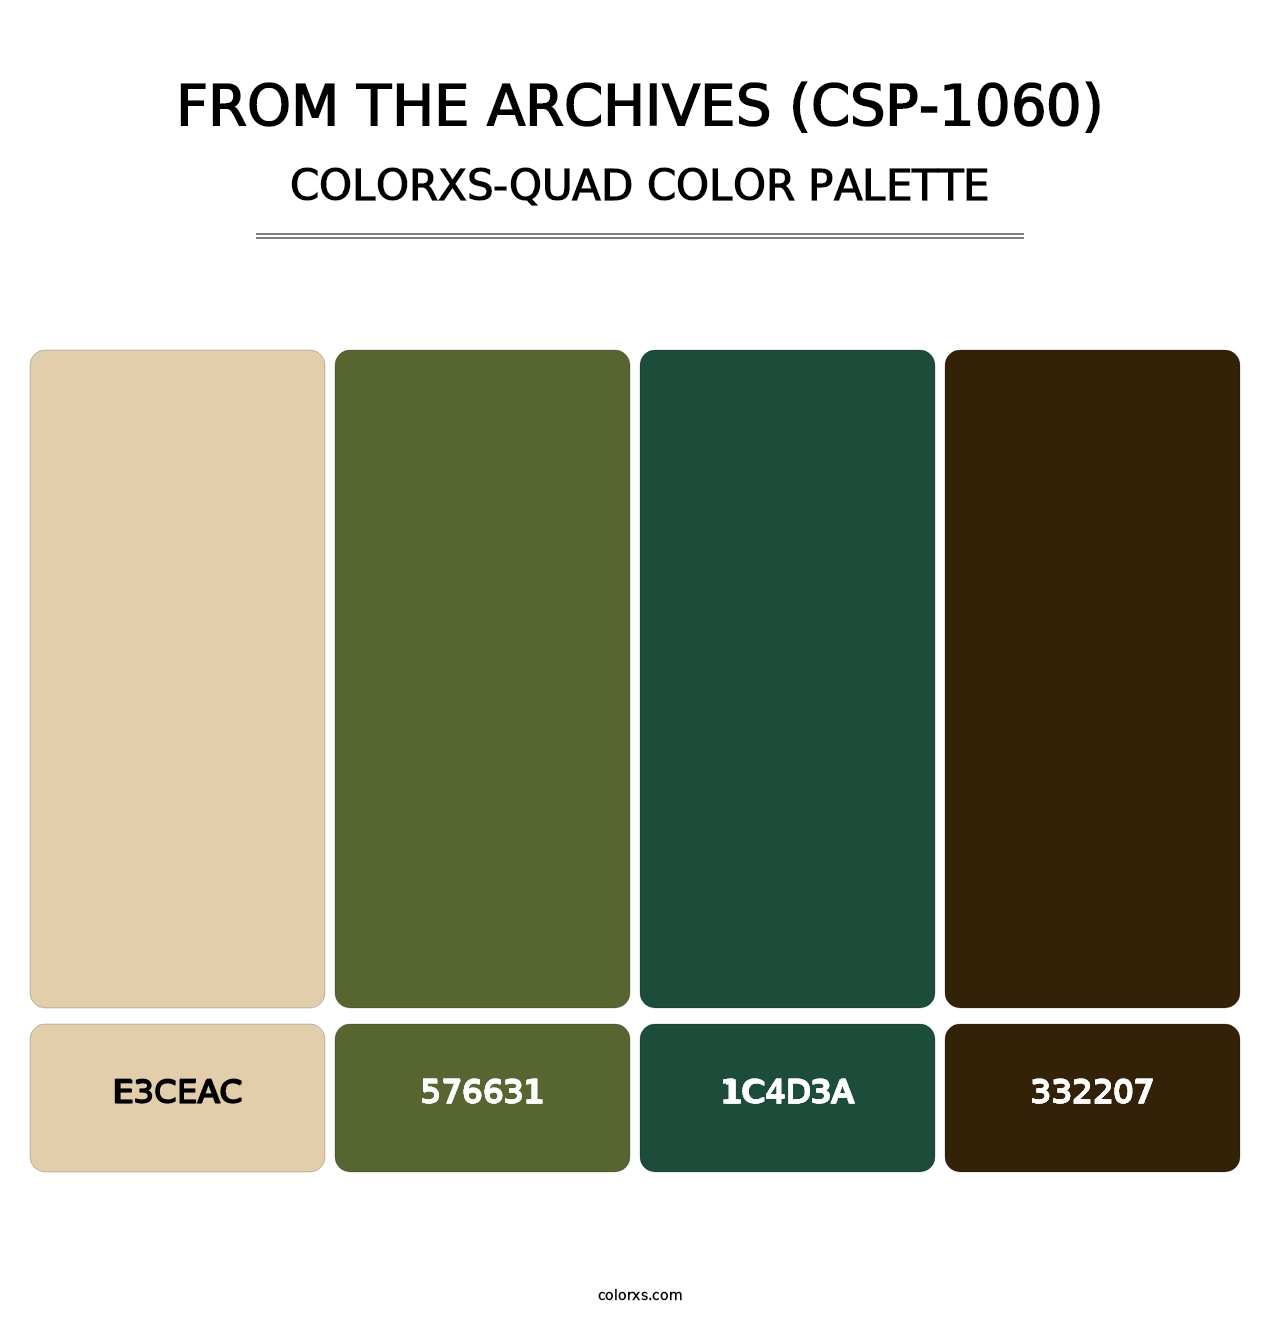 From the Archives (CSP-1060) - Colorxs Quad Palette